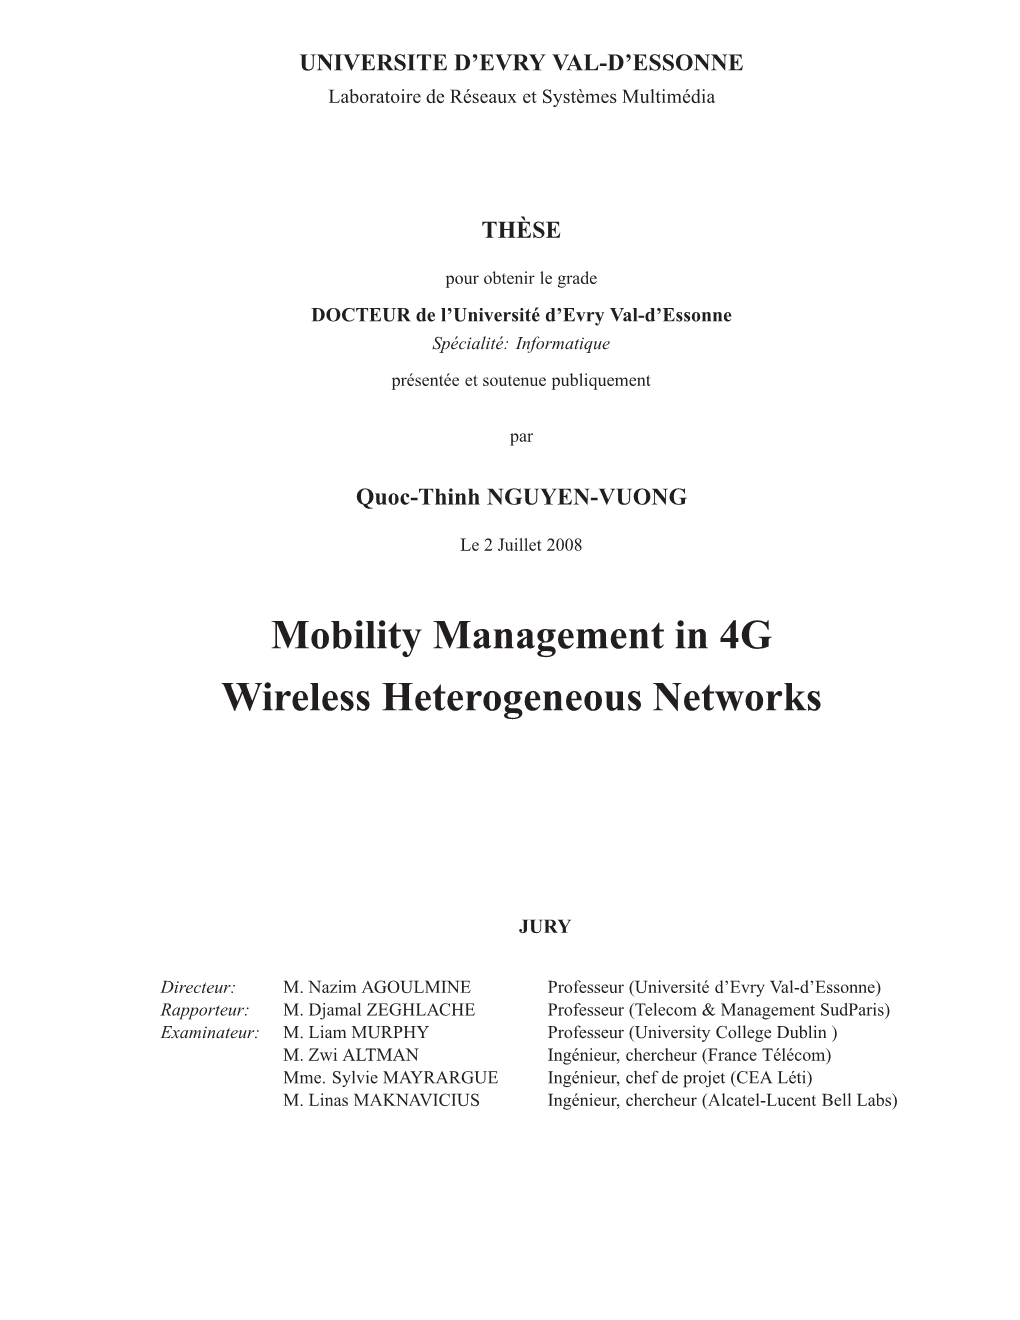 Mobility Management in 4G Wireless Heterogeneous Networks